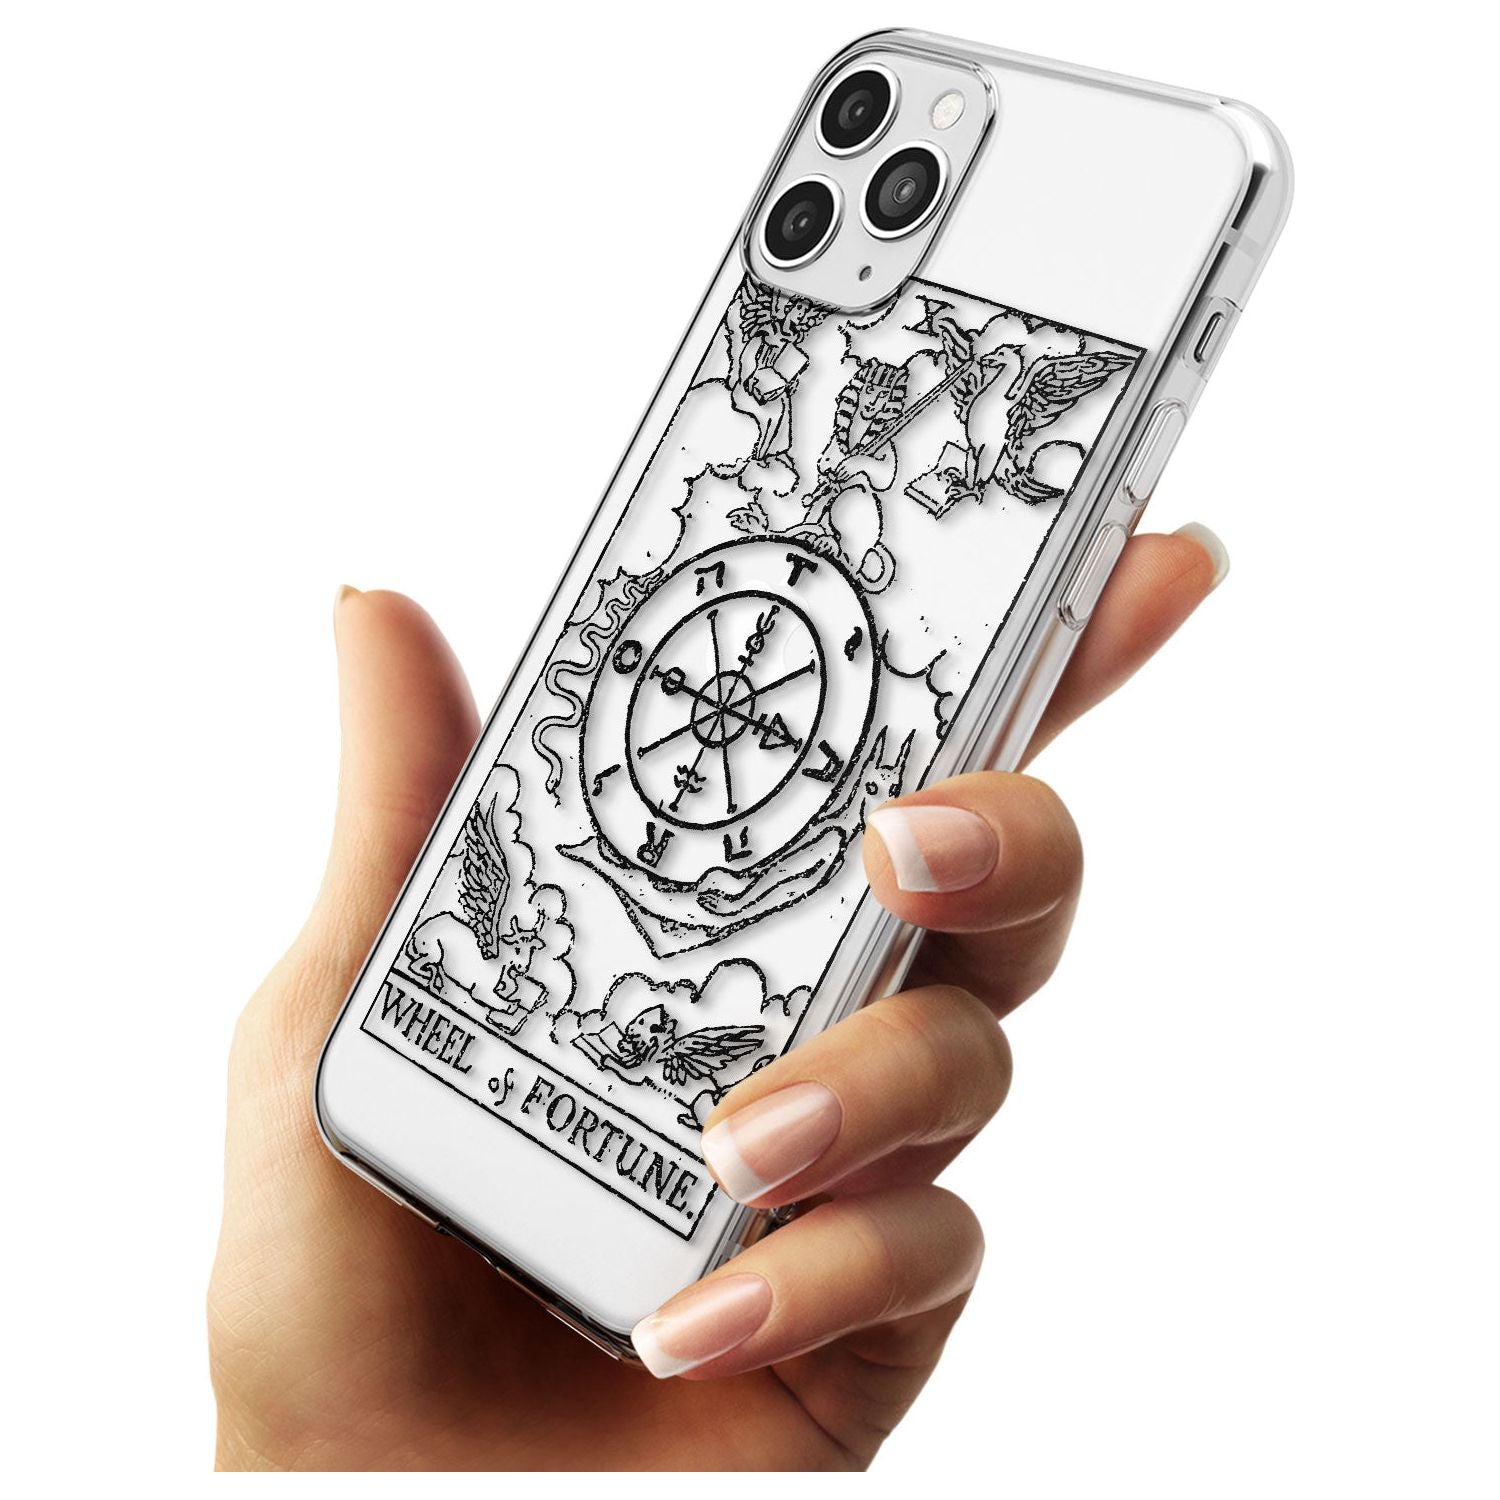 Wheel of Fortune Tarot Card - Transparent Black Impact Phone Case for iPhone 11 Pro Max